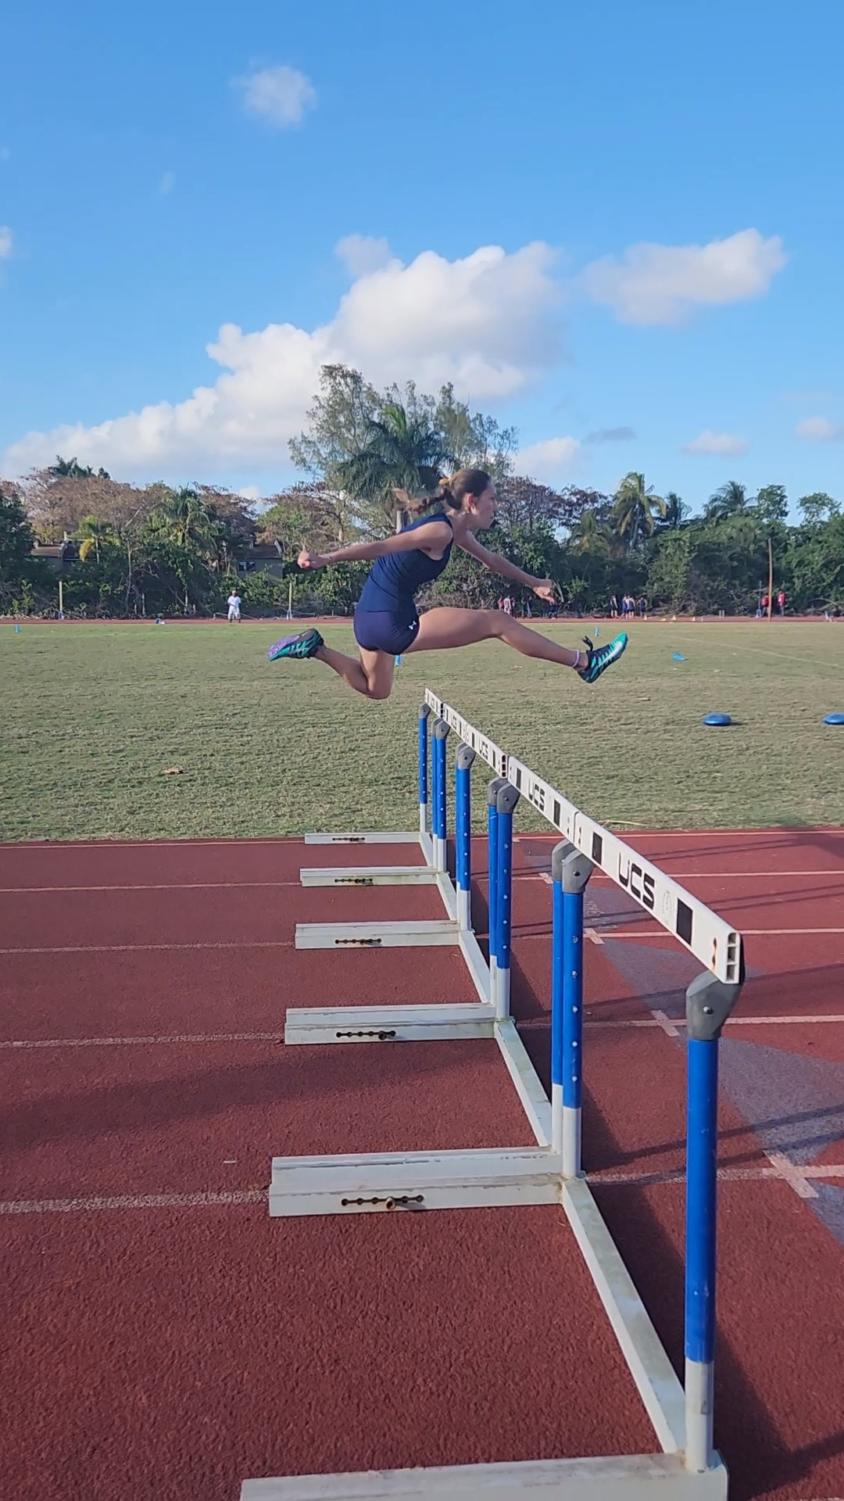 Senior Taylor McHugh jumps over the last hurdle in the 100m hurdle event at the Ft. Lauderdale meet on Feb. 22.